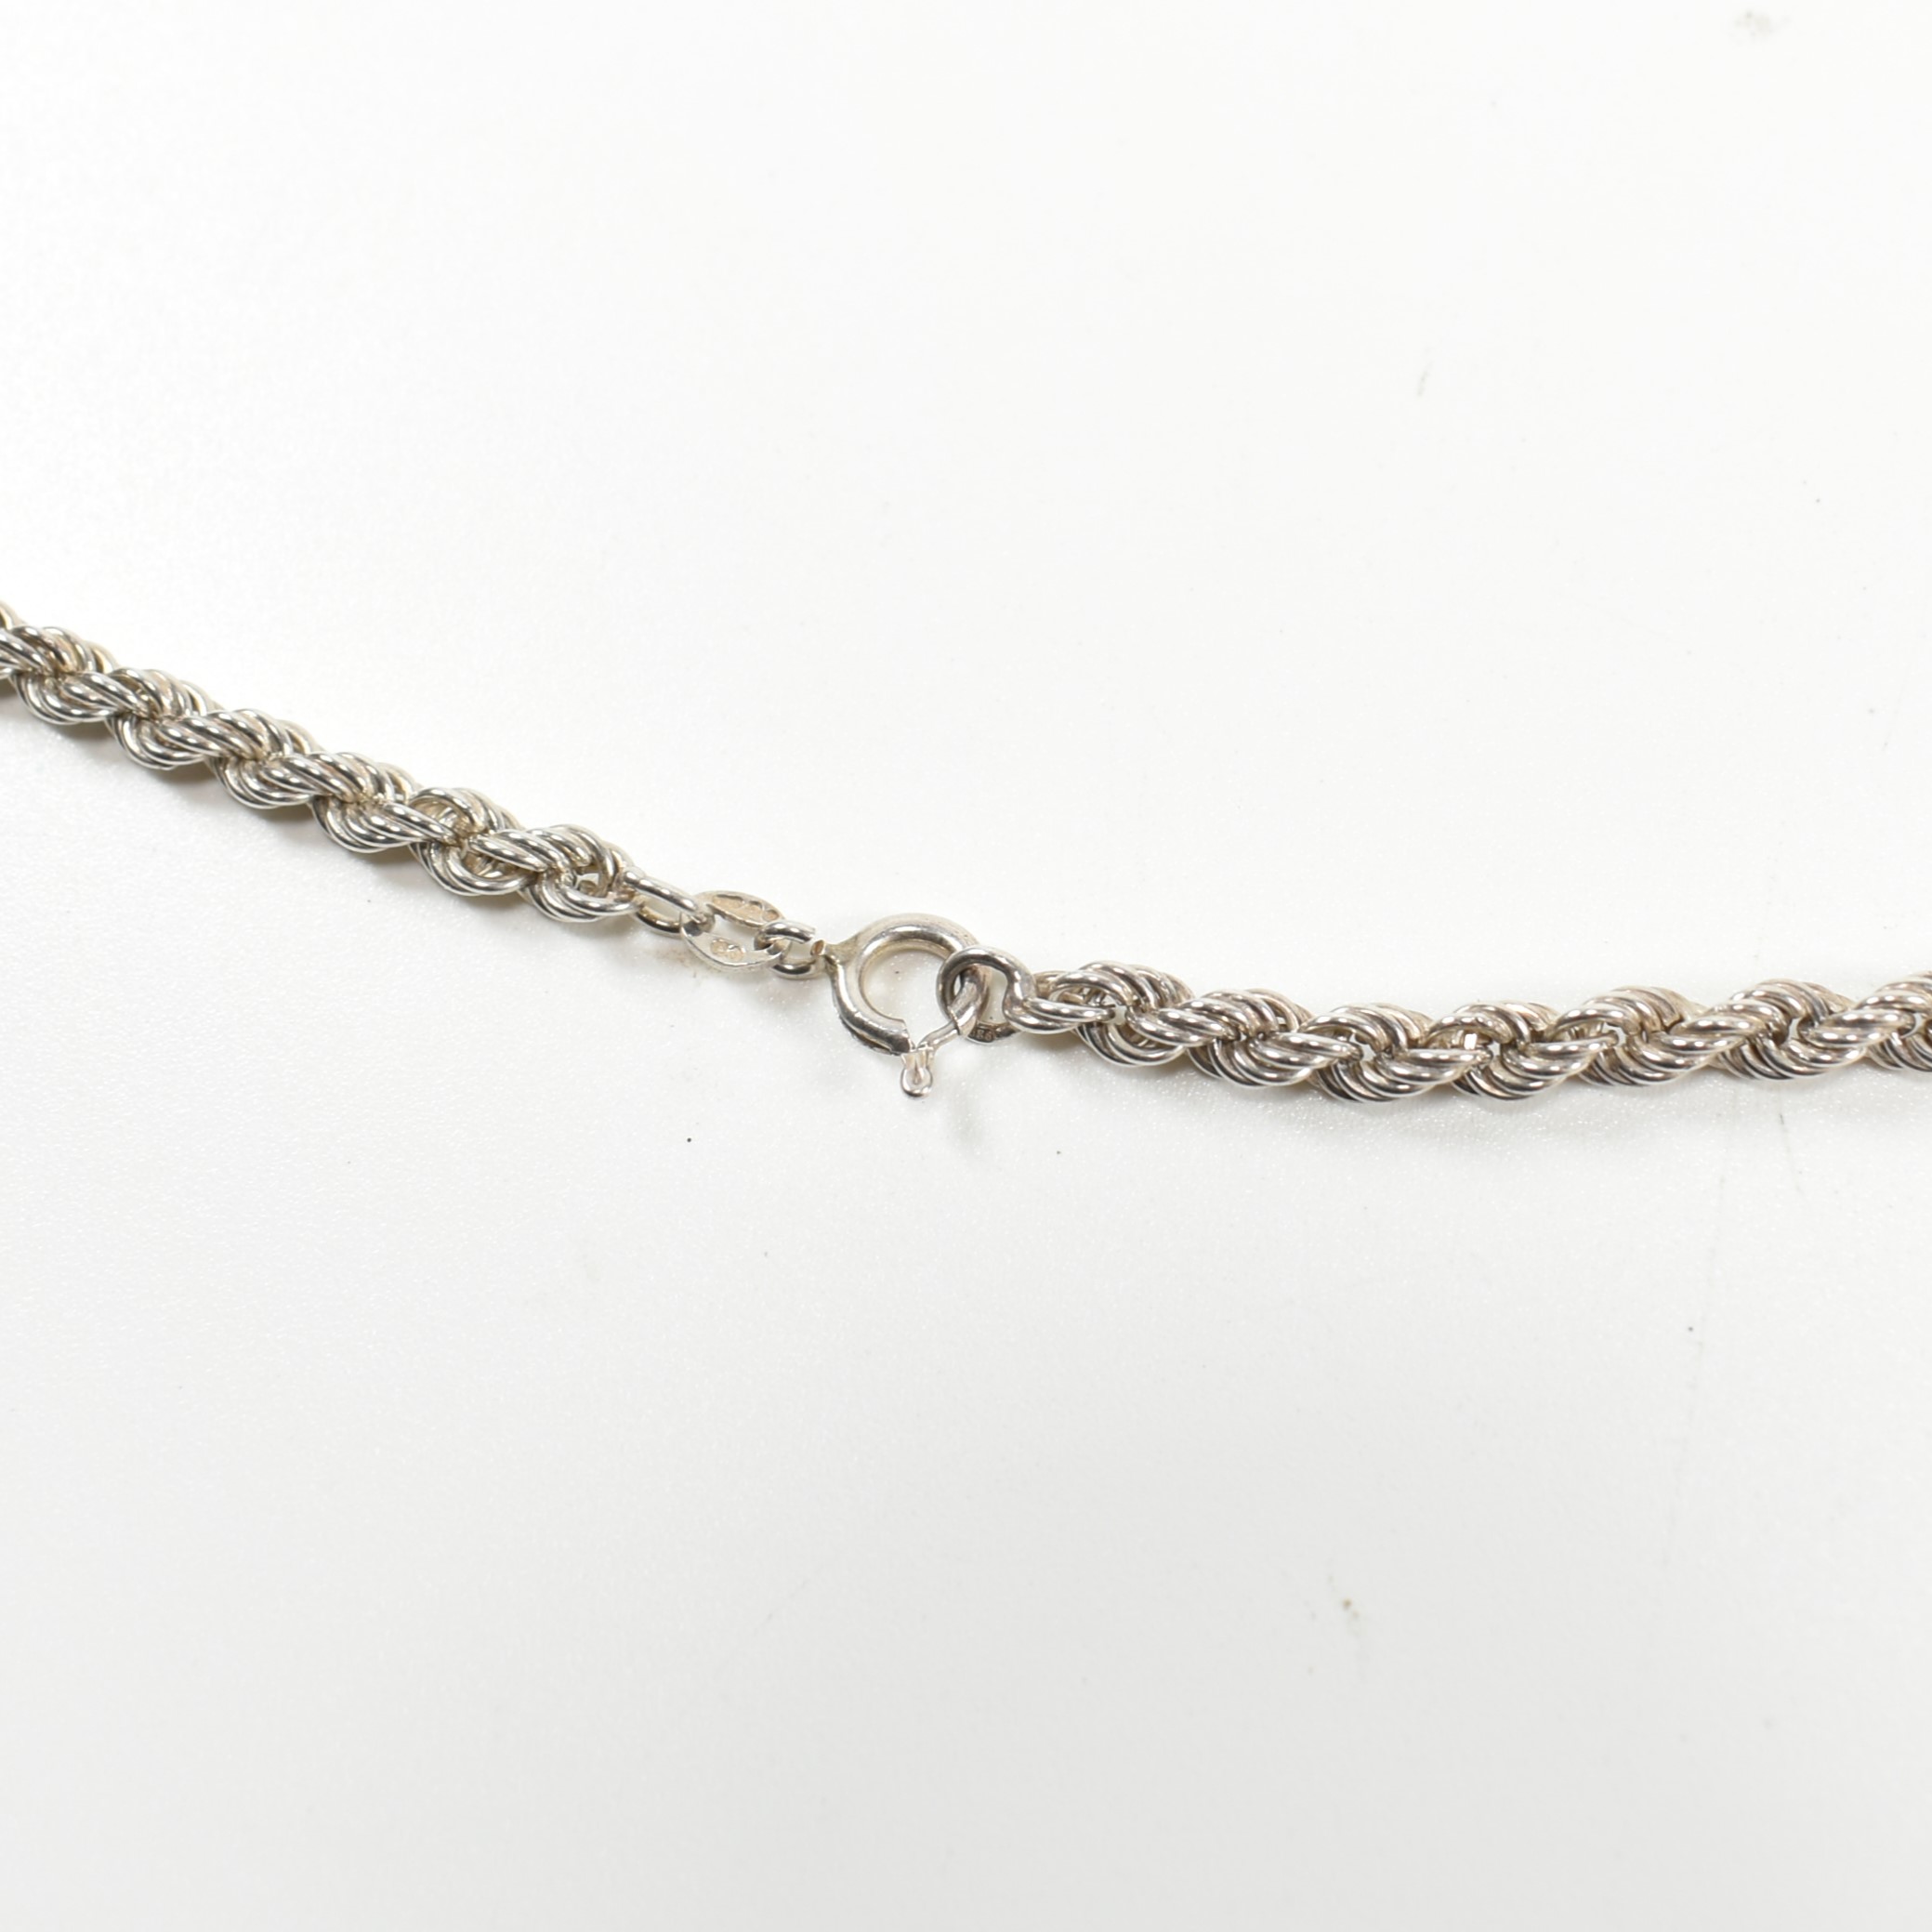 HALLMARKED SILVER TWISTED ROPE CHAIN NECKLACE - Image 2 of 4